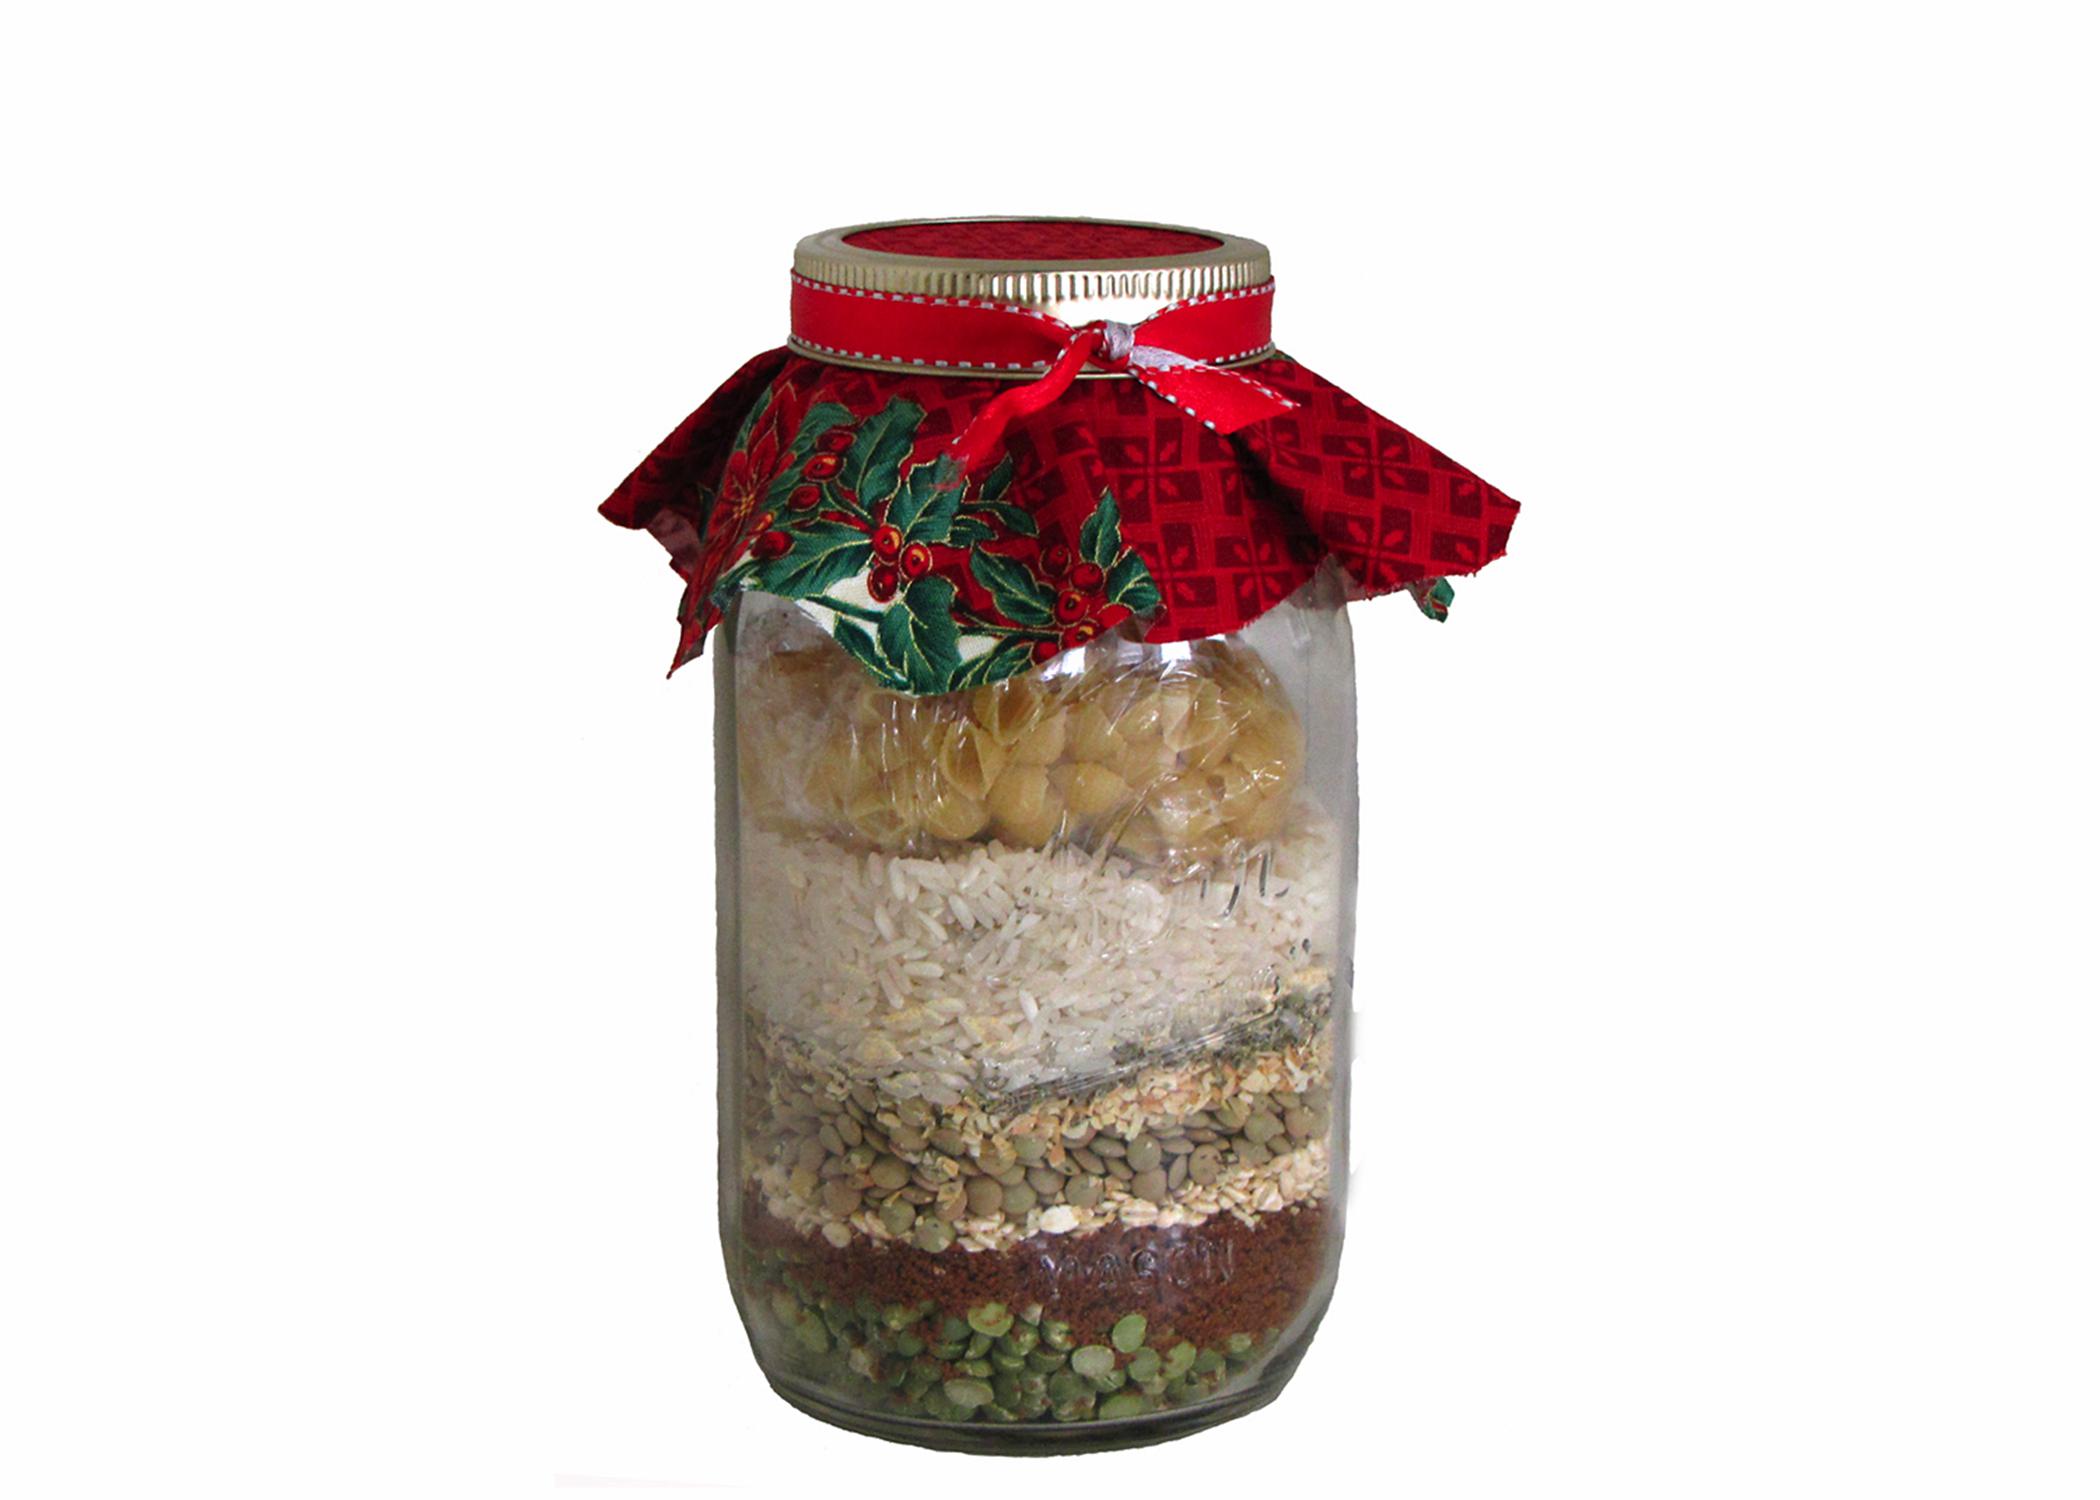 Handmade food gifts, such as jars with ingredients for a pot of soup or batch of cookies, are thoughtful ideas during the holiday season. (Submitted photo)